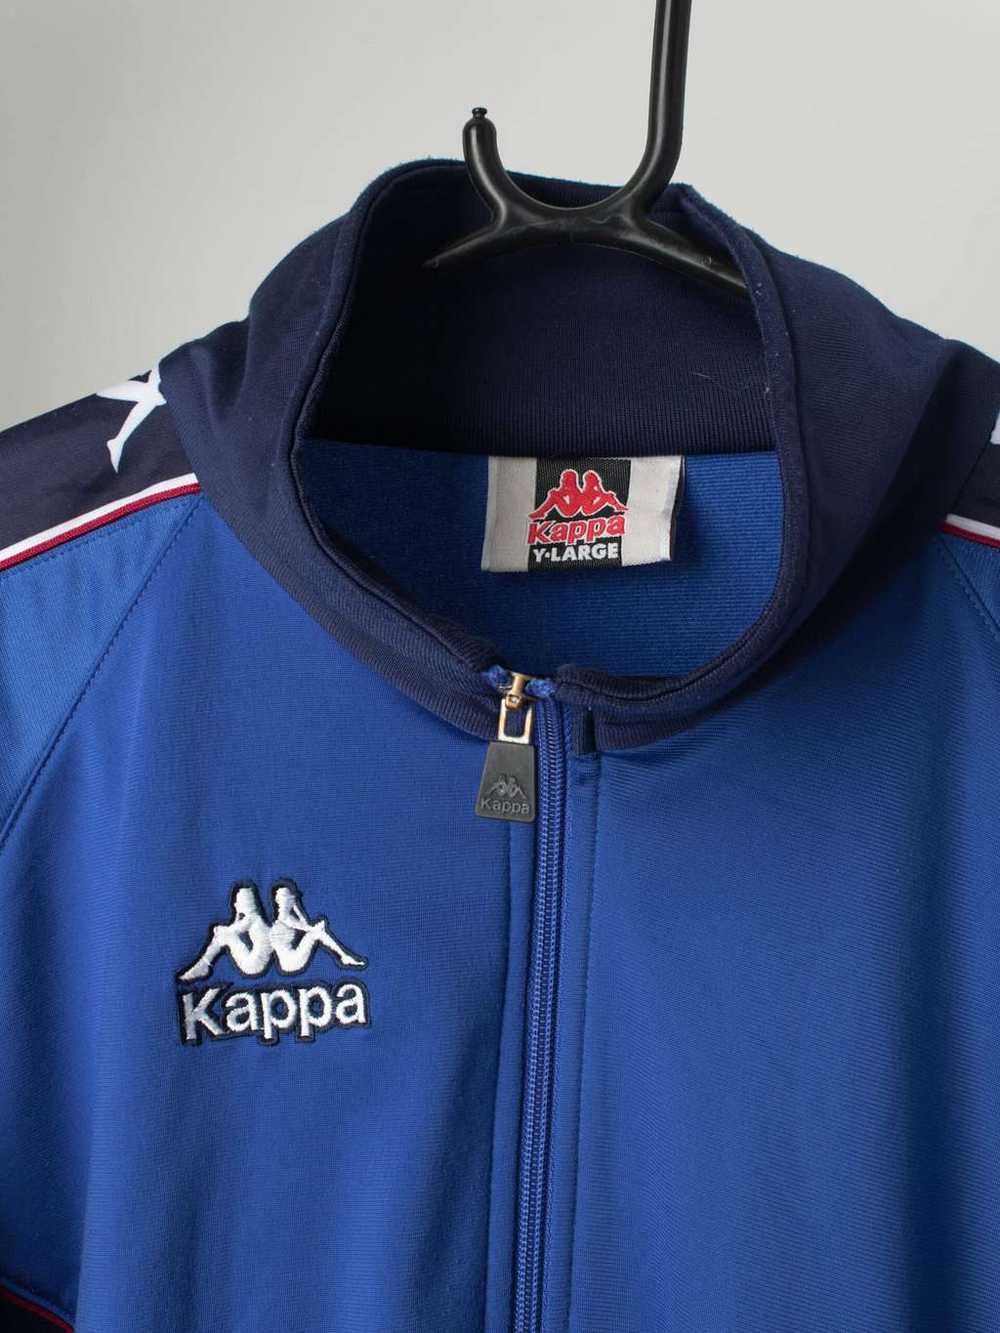 90s vintage Kappa track jacket, blue red and whit… - image 2